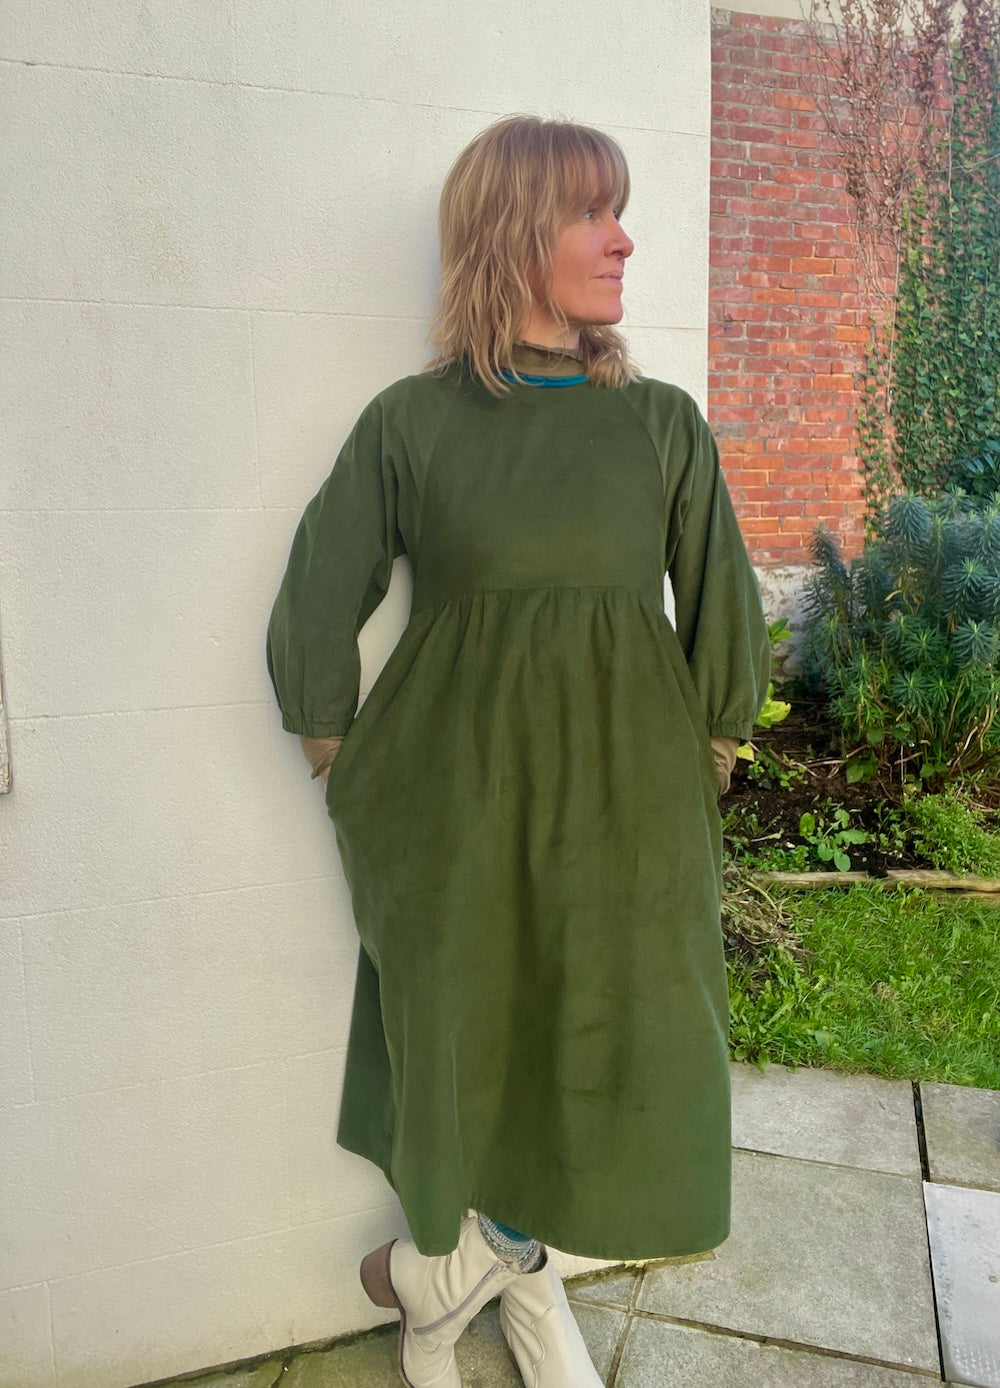 Model wearing a mossy green needlecord dress with hands in pockets looking in the distance